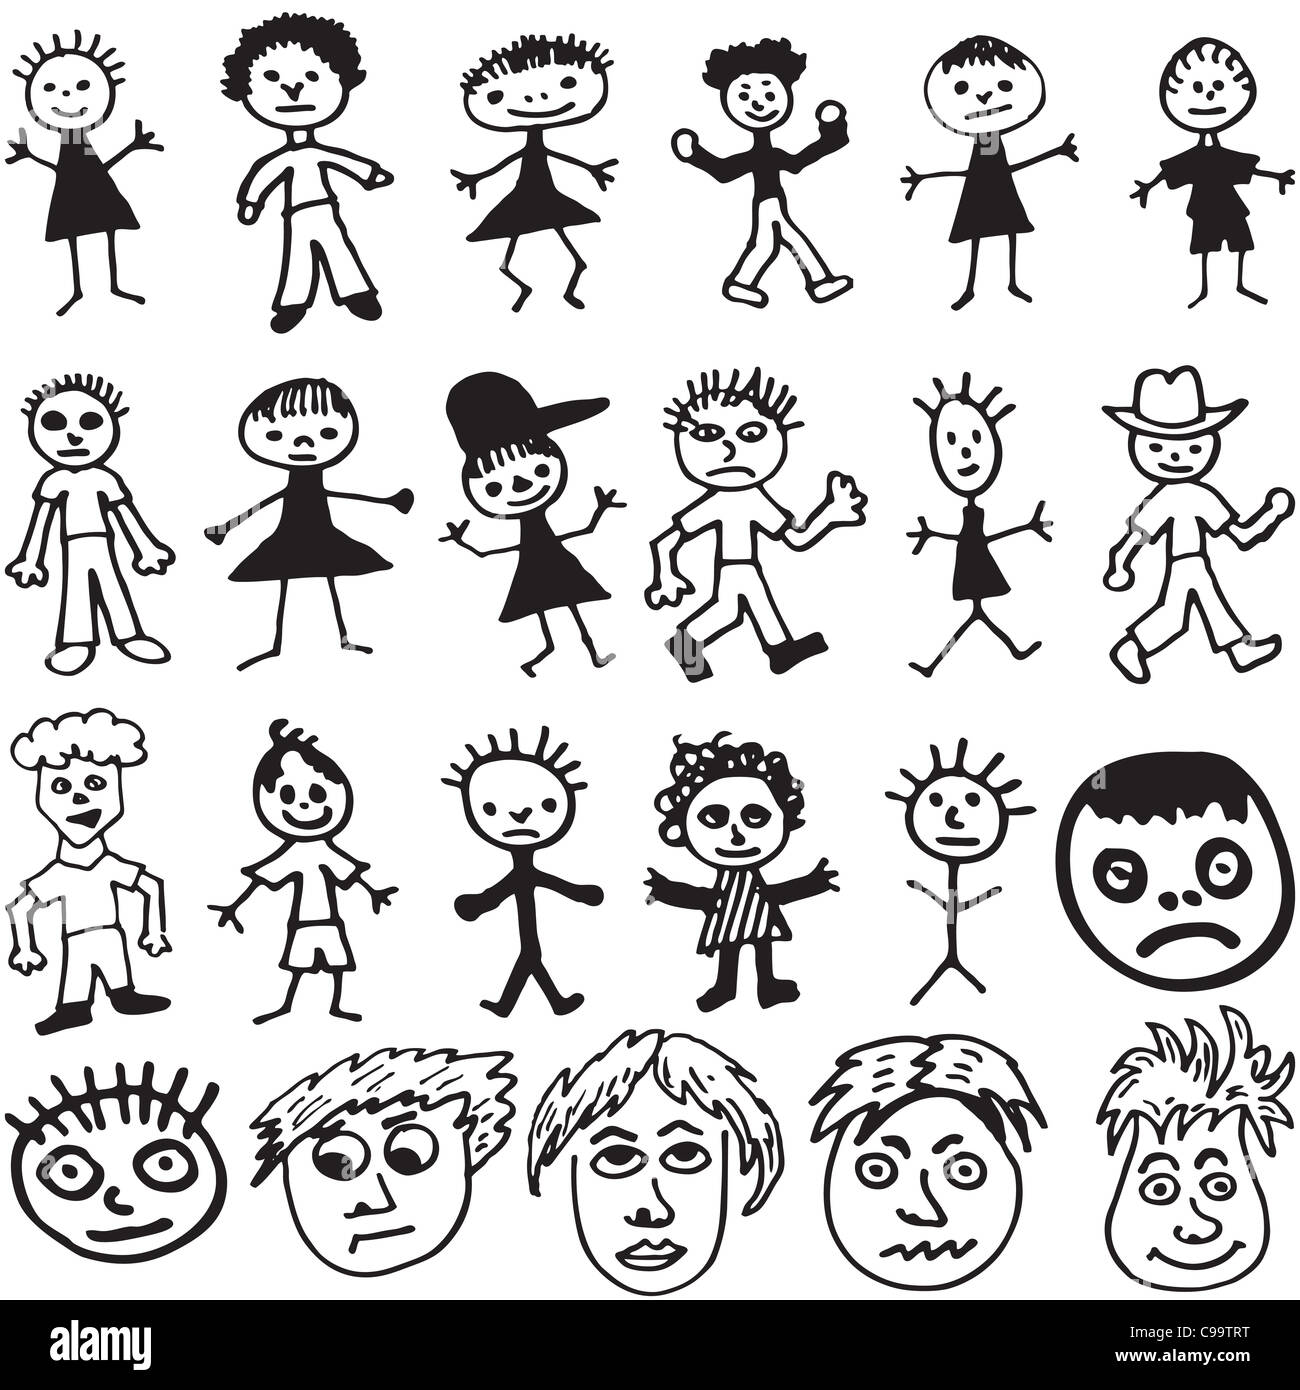 A Collection Of 23 Cartoon Characters And Faces Drawn In The Style A Child Would Draw Stock Photo Alamy